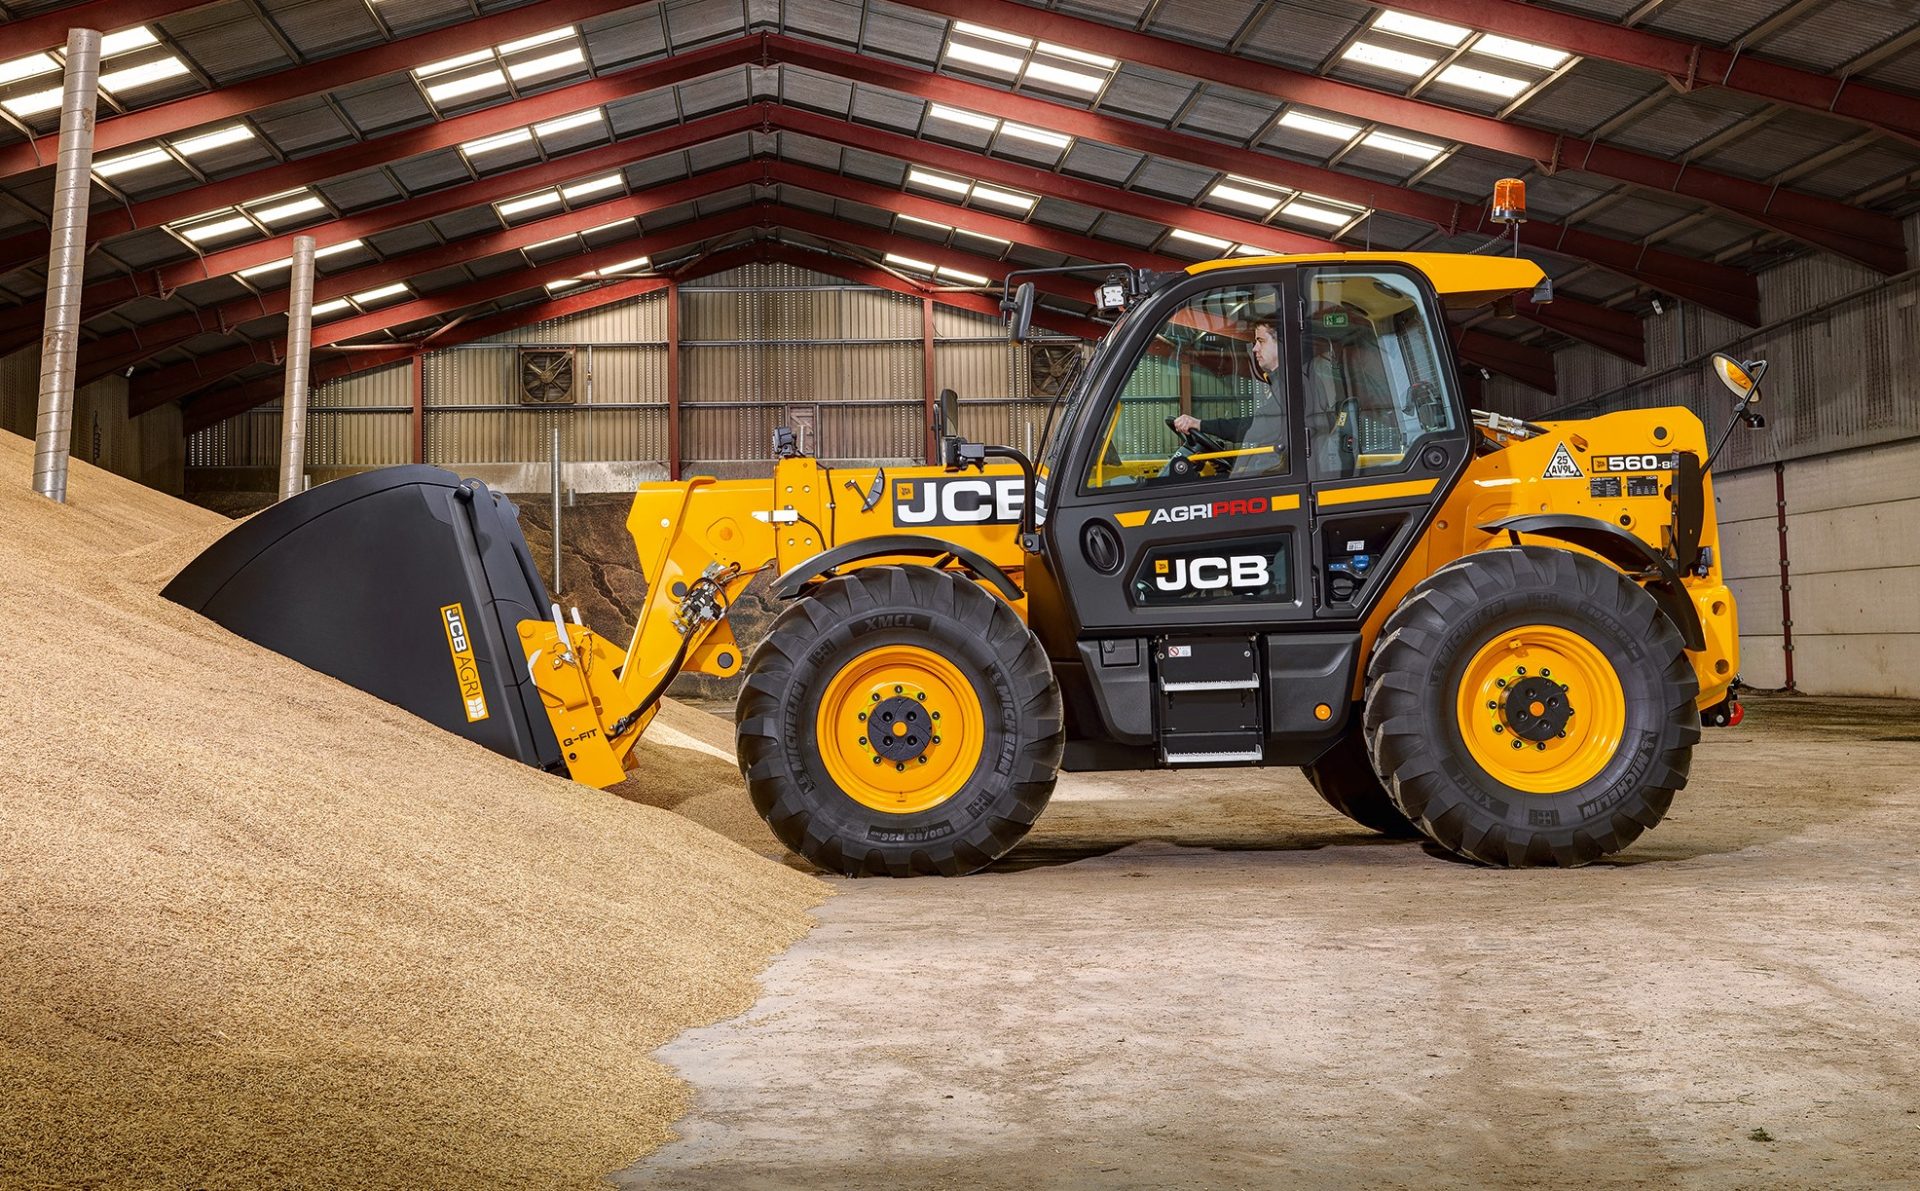 New JCB Loadalls and more at Agritechnica